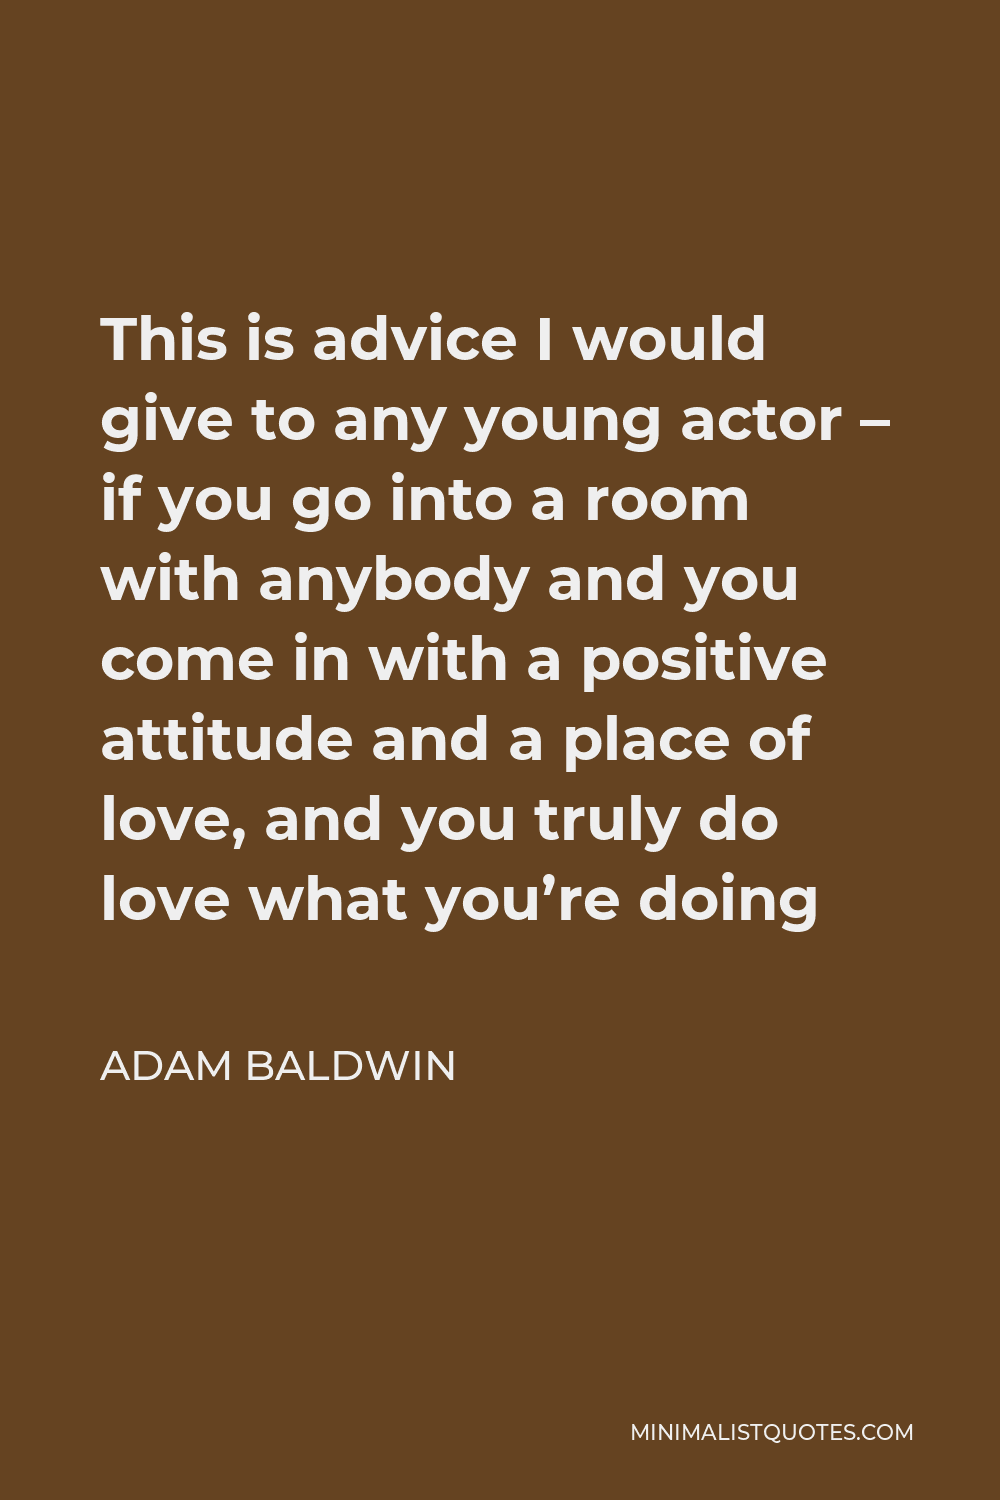 Adam Baldwin Quote - This is advice I would give to any young actor – if you go into a room with anybody and you come in with a positive attitude and a place of love, and you truly do love what you’re doing